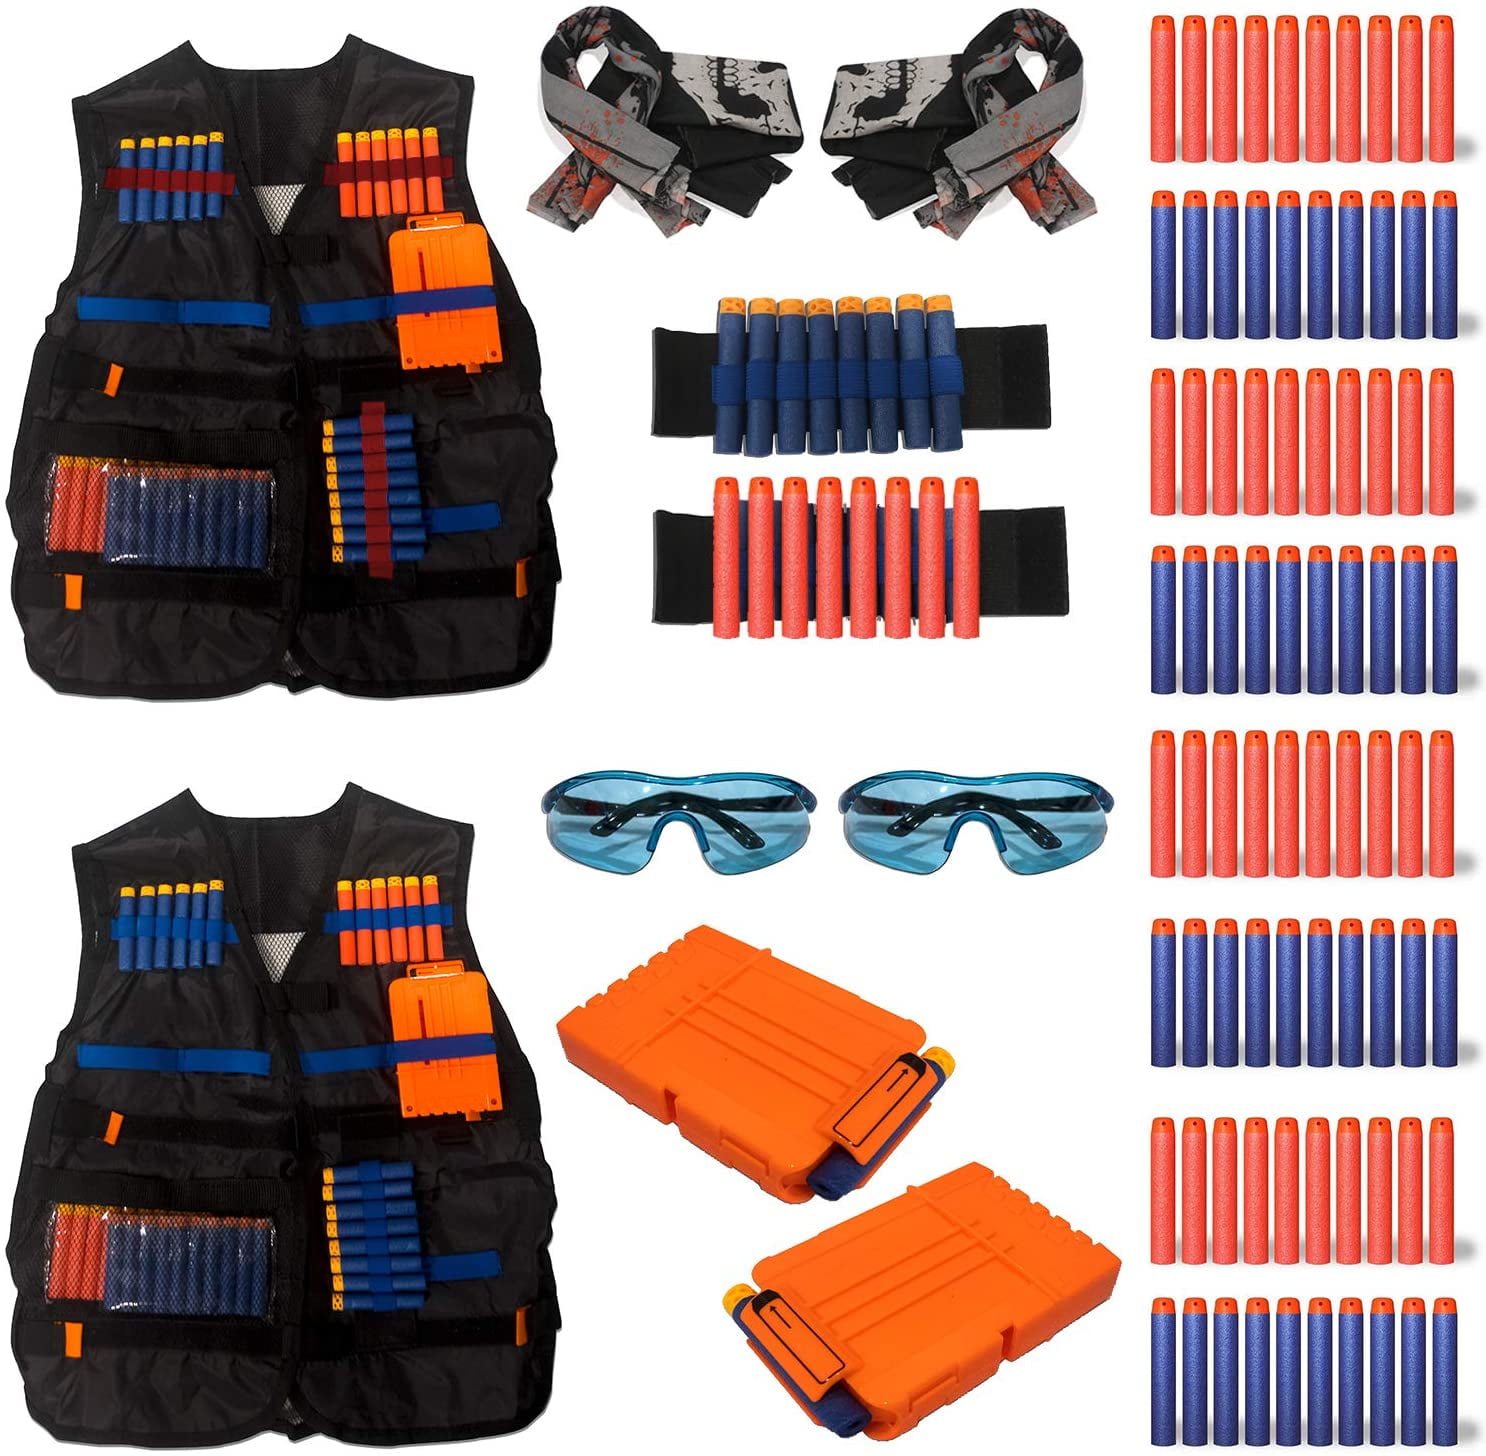 Official Nerf N-Strike Elite Series Tactical Vest Toy Play Quick MYTODDLER New 